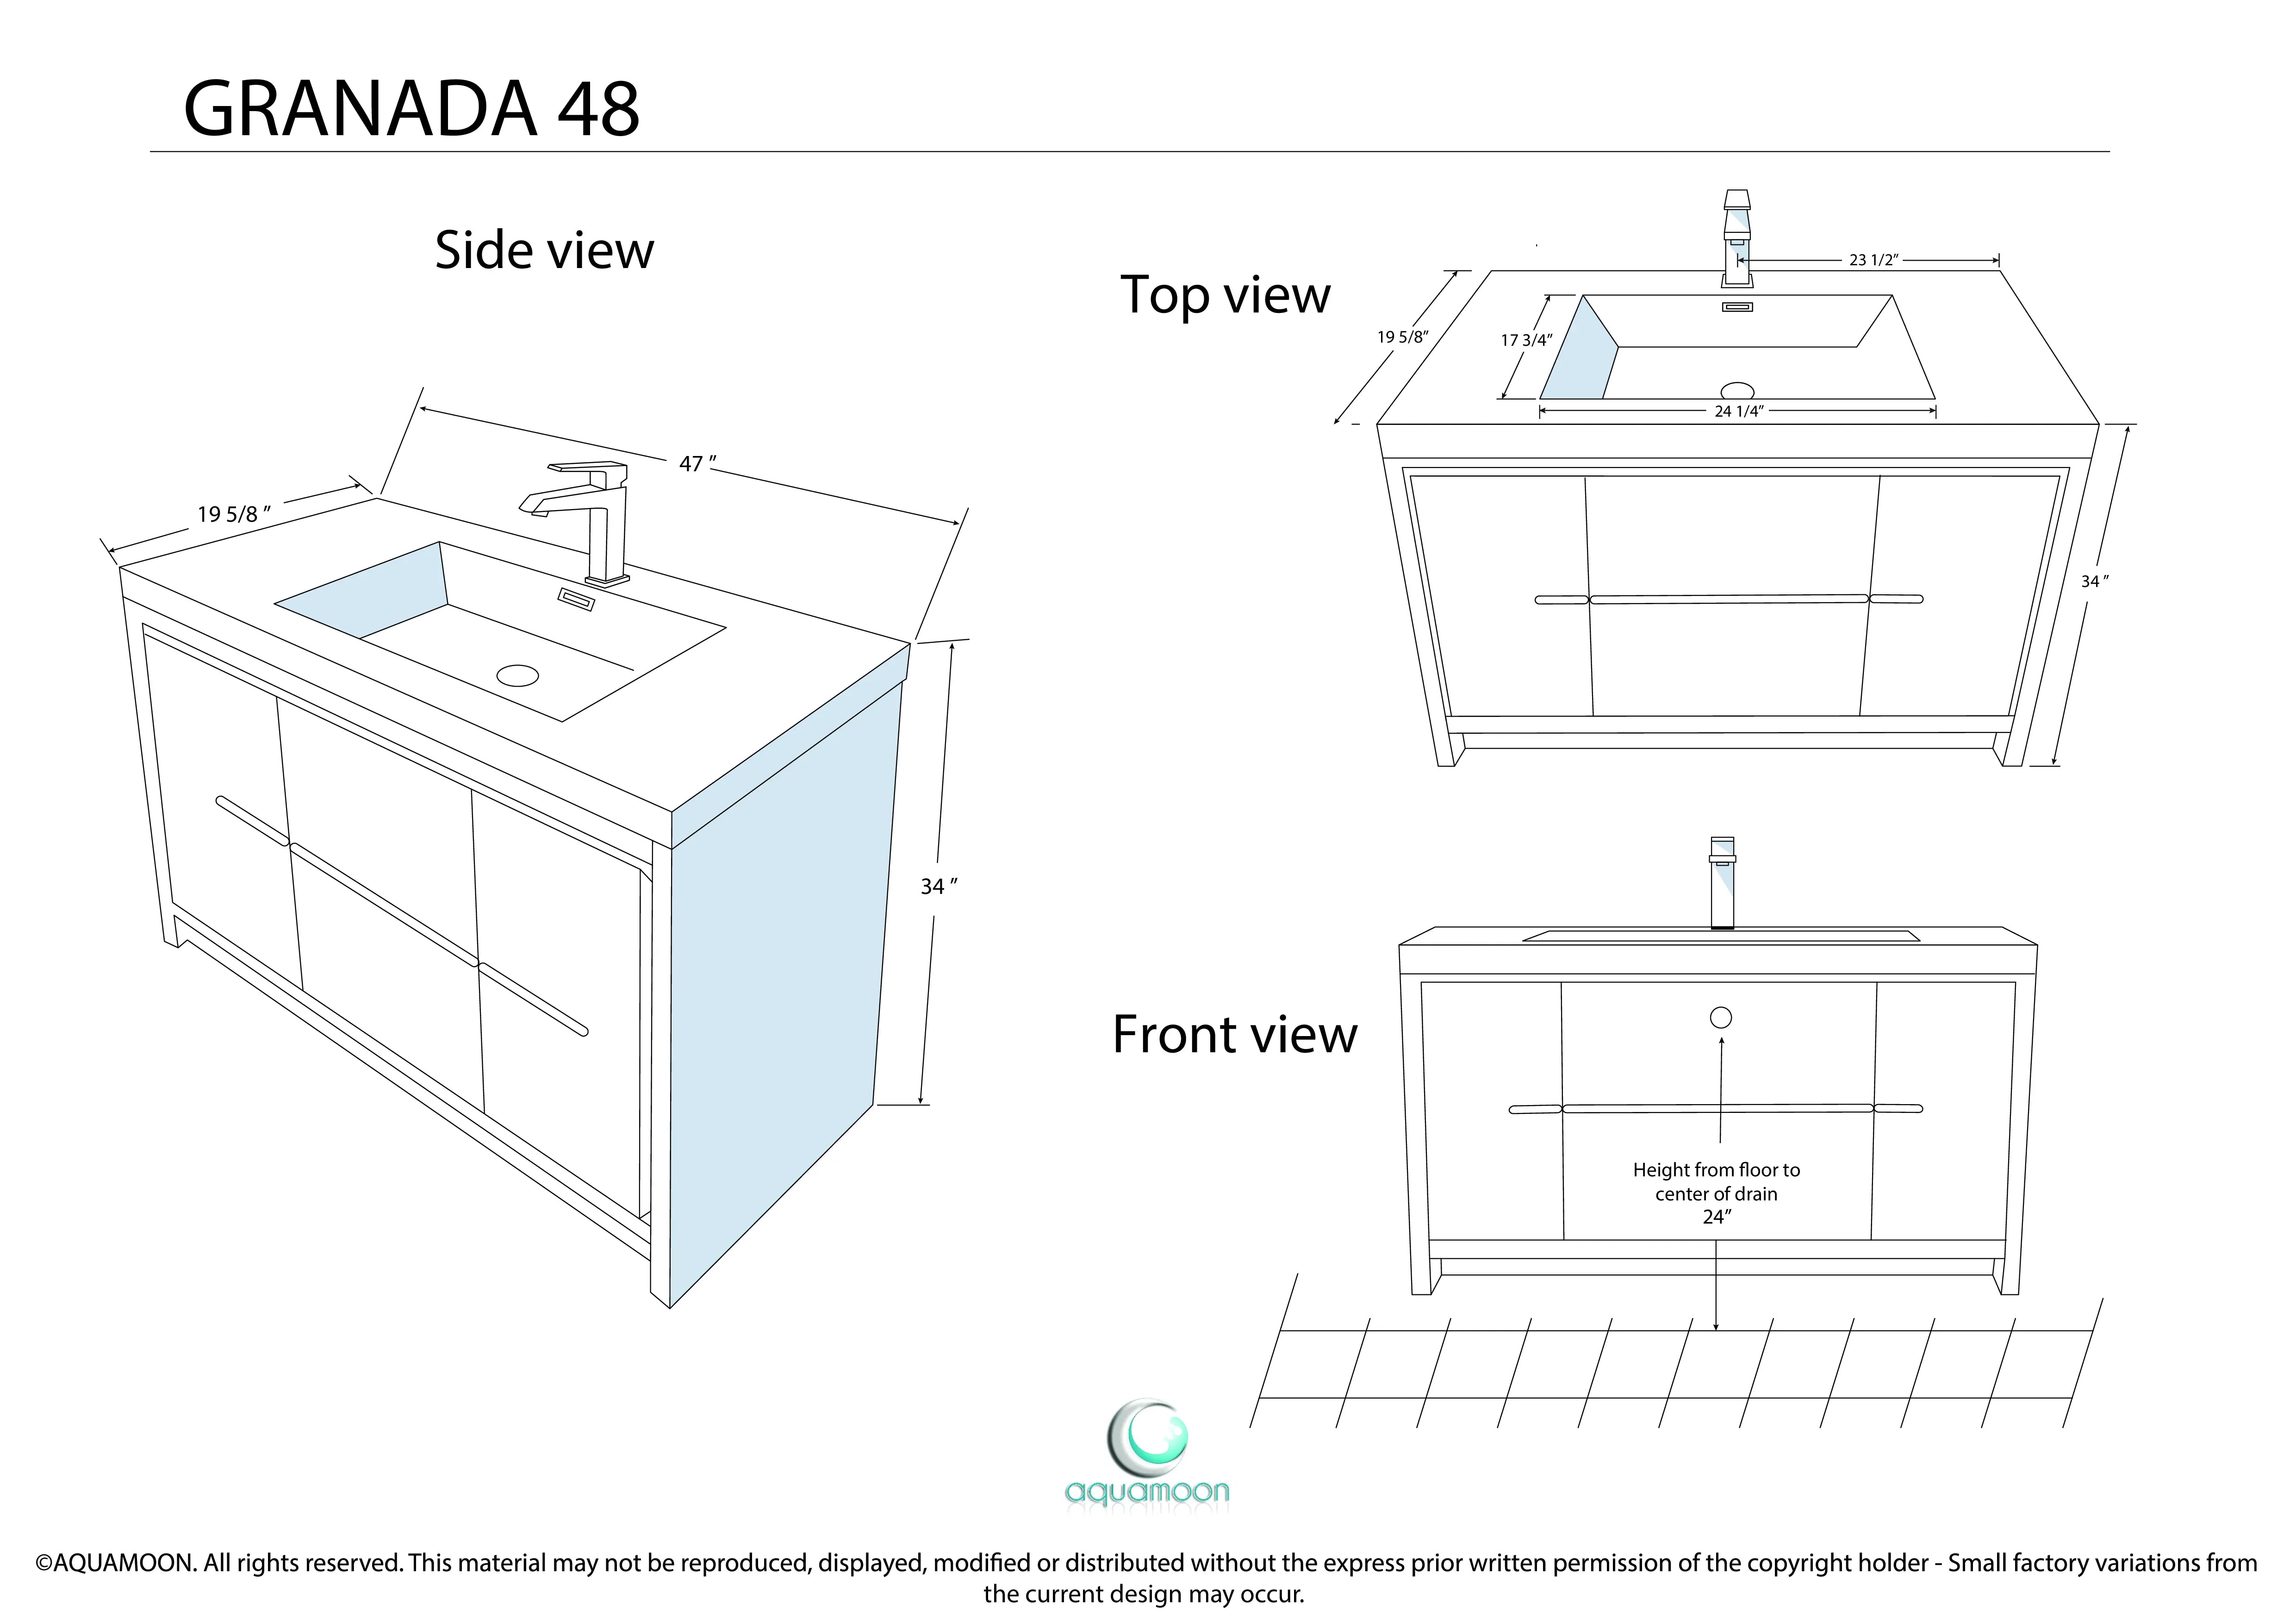 Granada 47.5 White High Gloss With Chrome Handle Cabinet, Square Cultured Marble Sink, Free Standing Modern Vanity Set